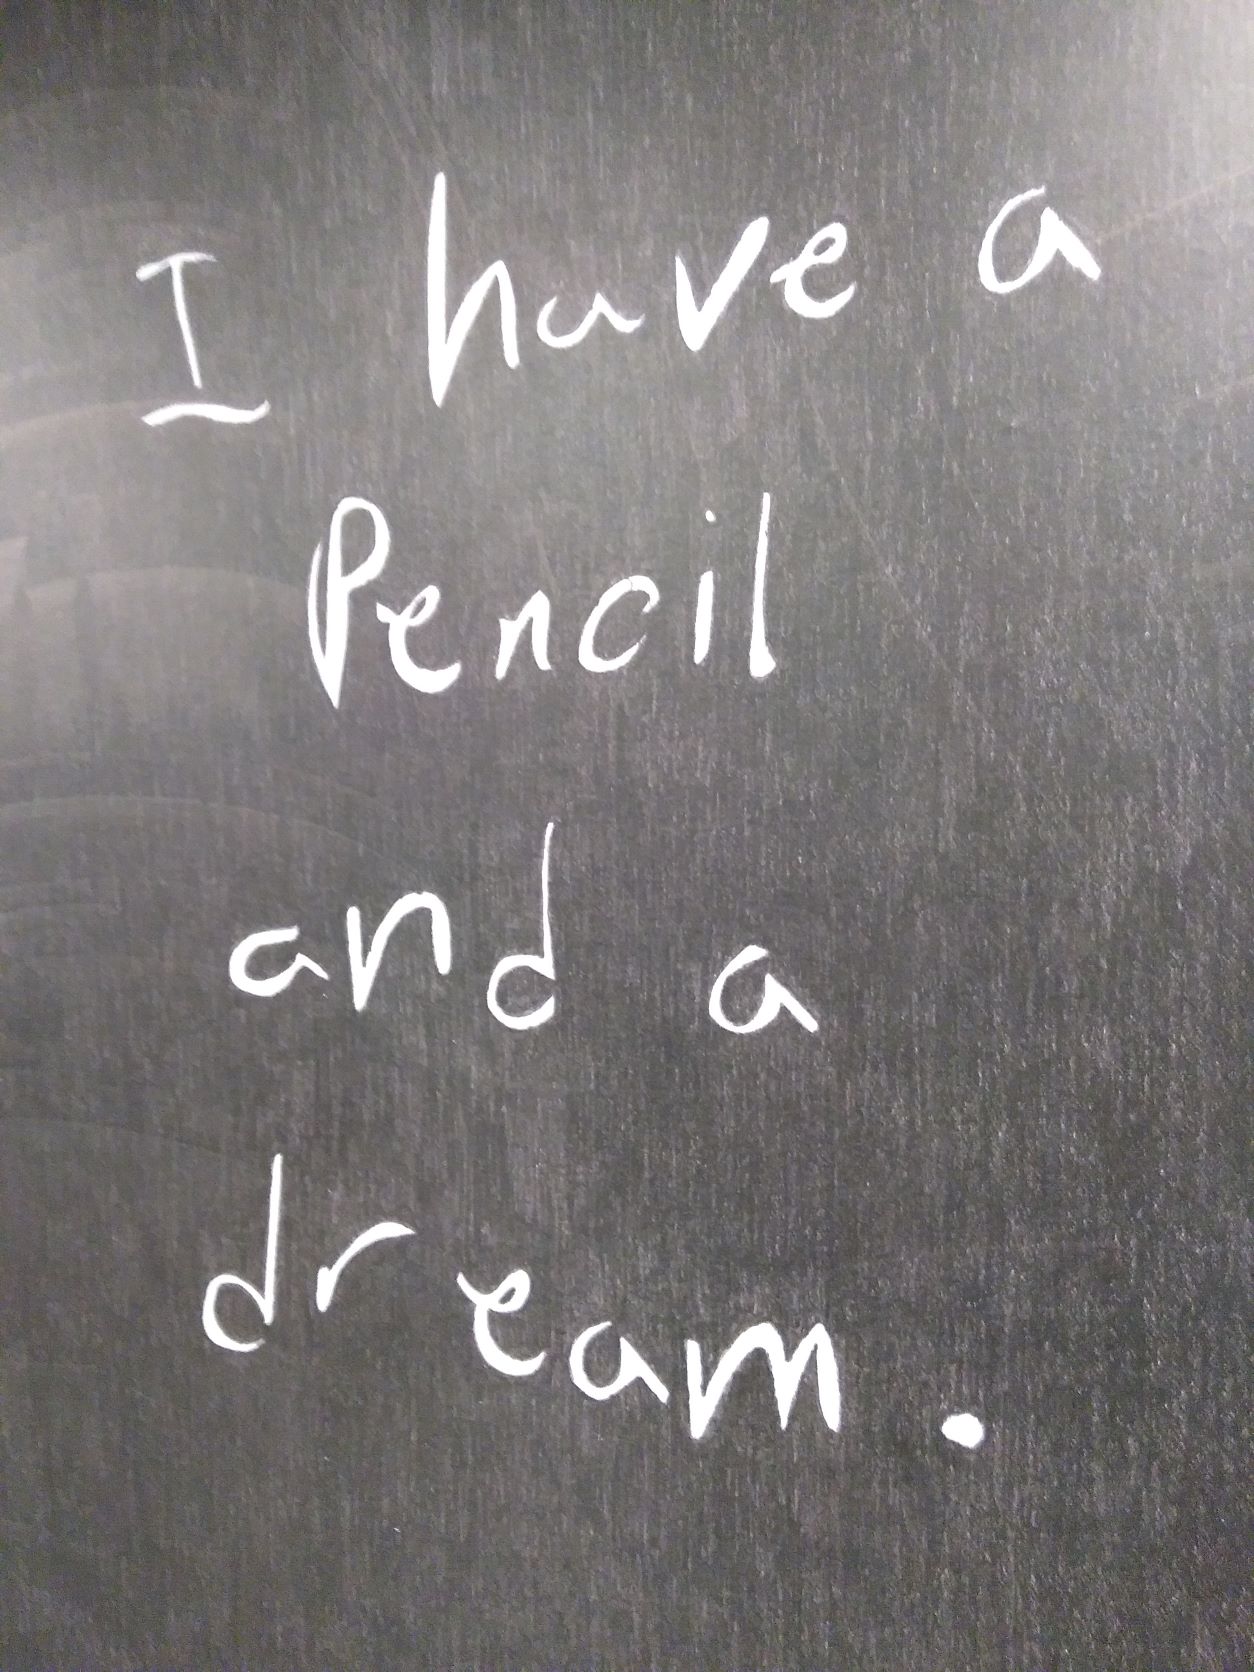 I have a pencil and a dream